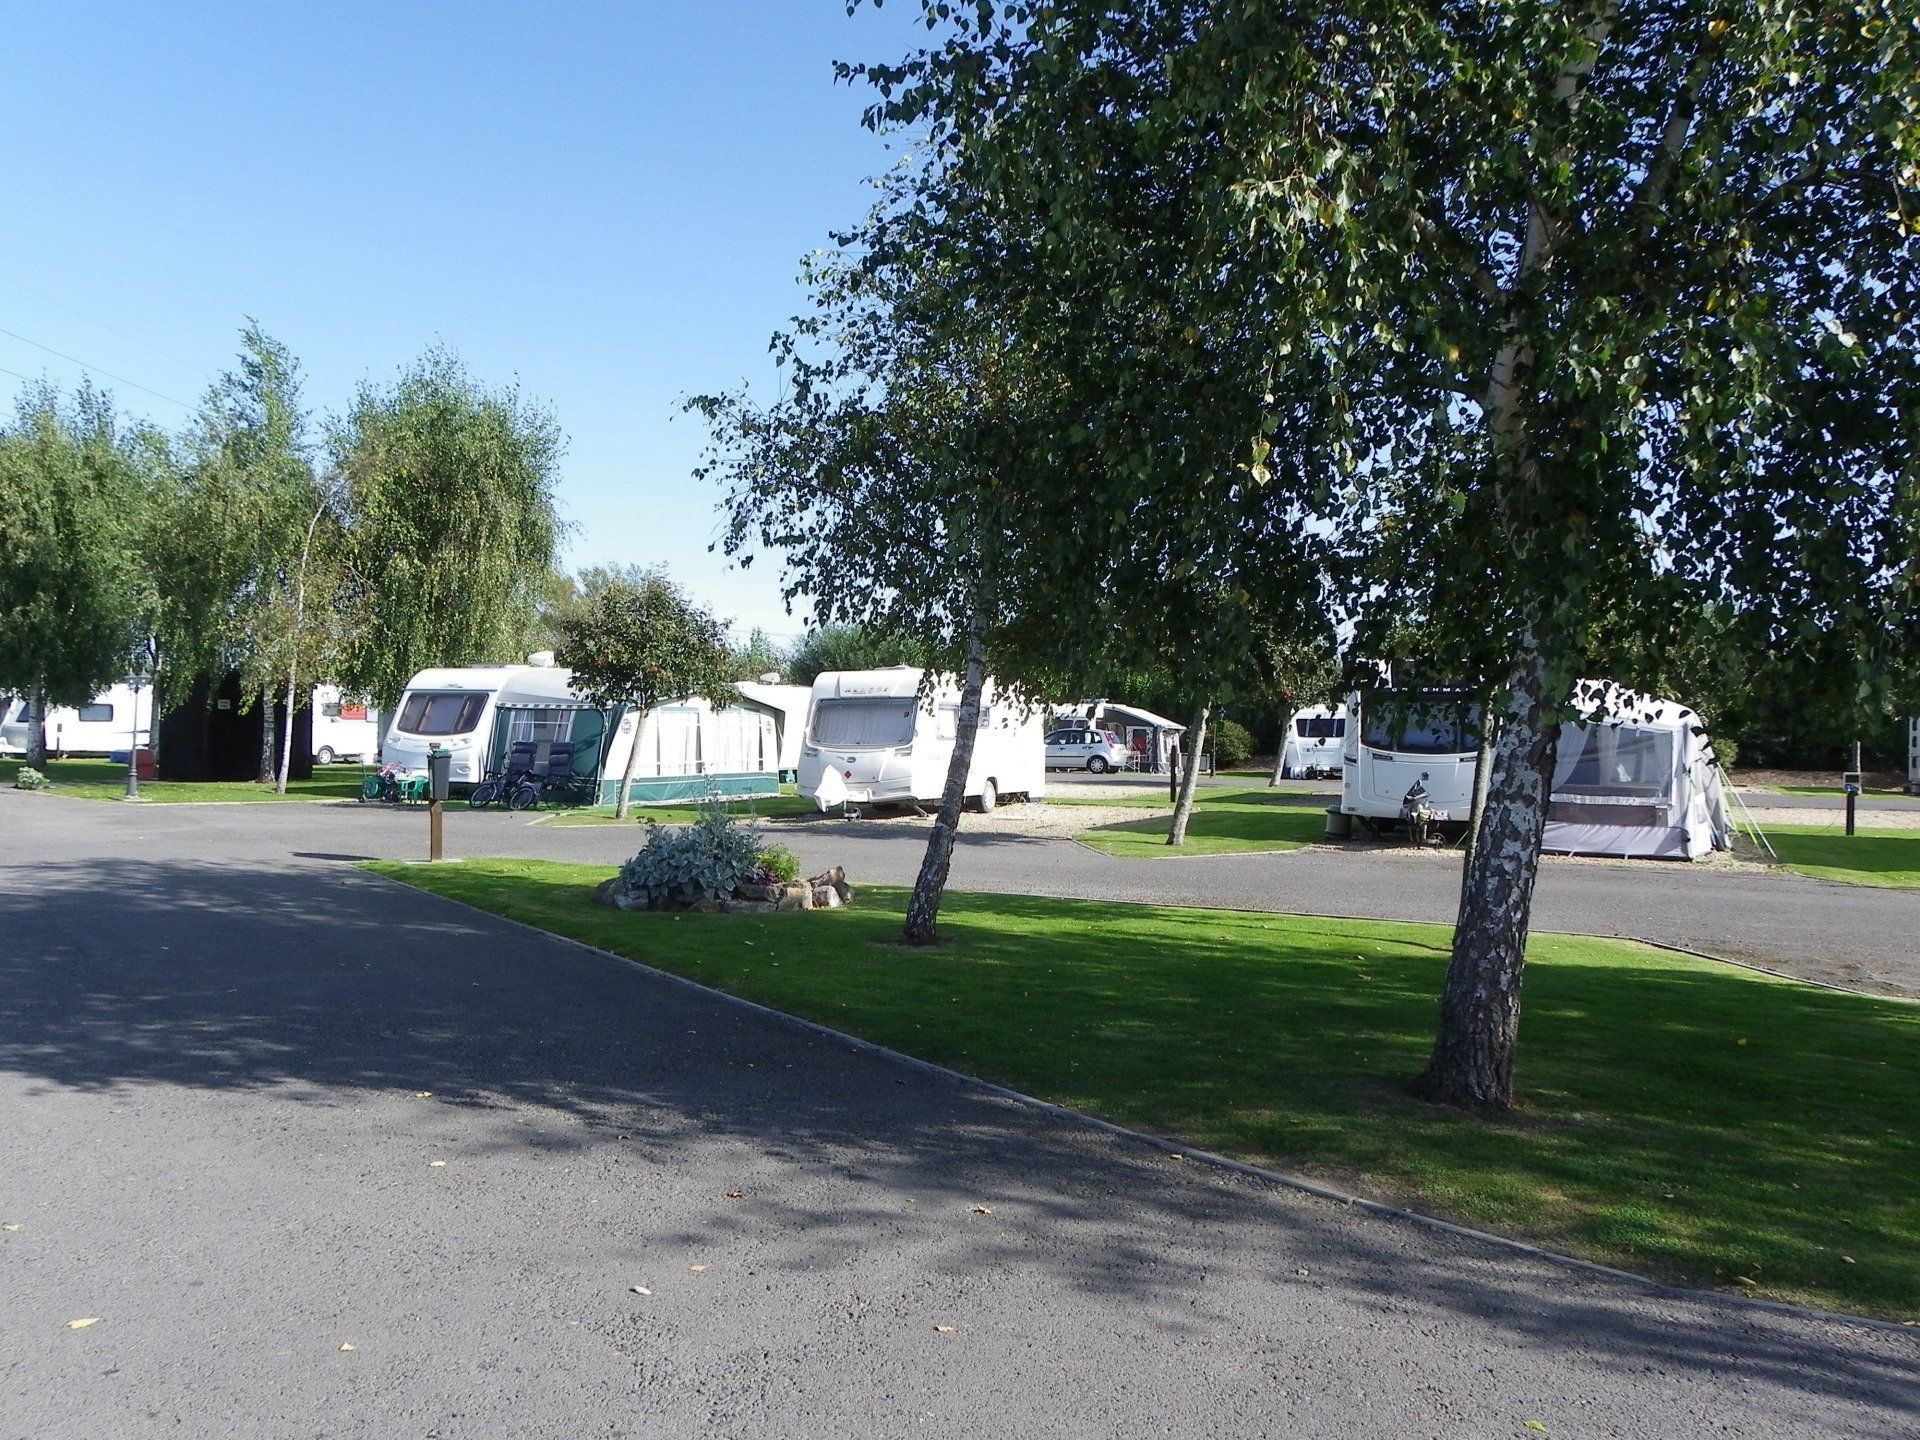 Caravans with awnings at Coombes Cider Farm.